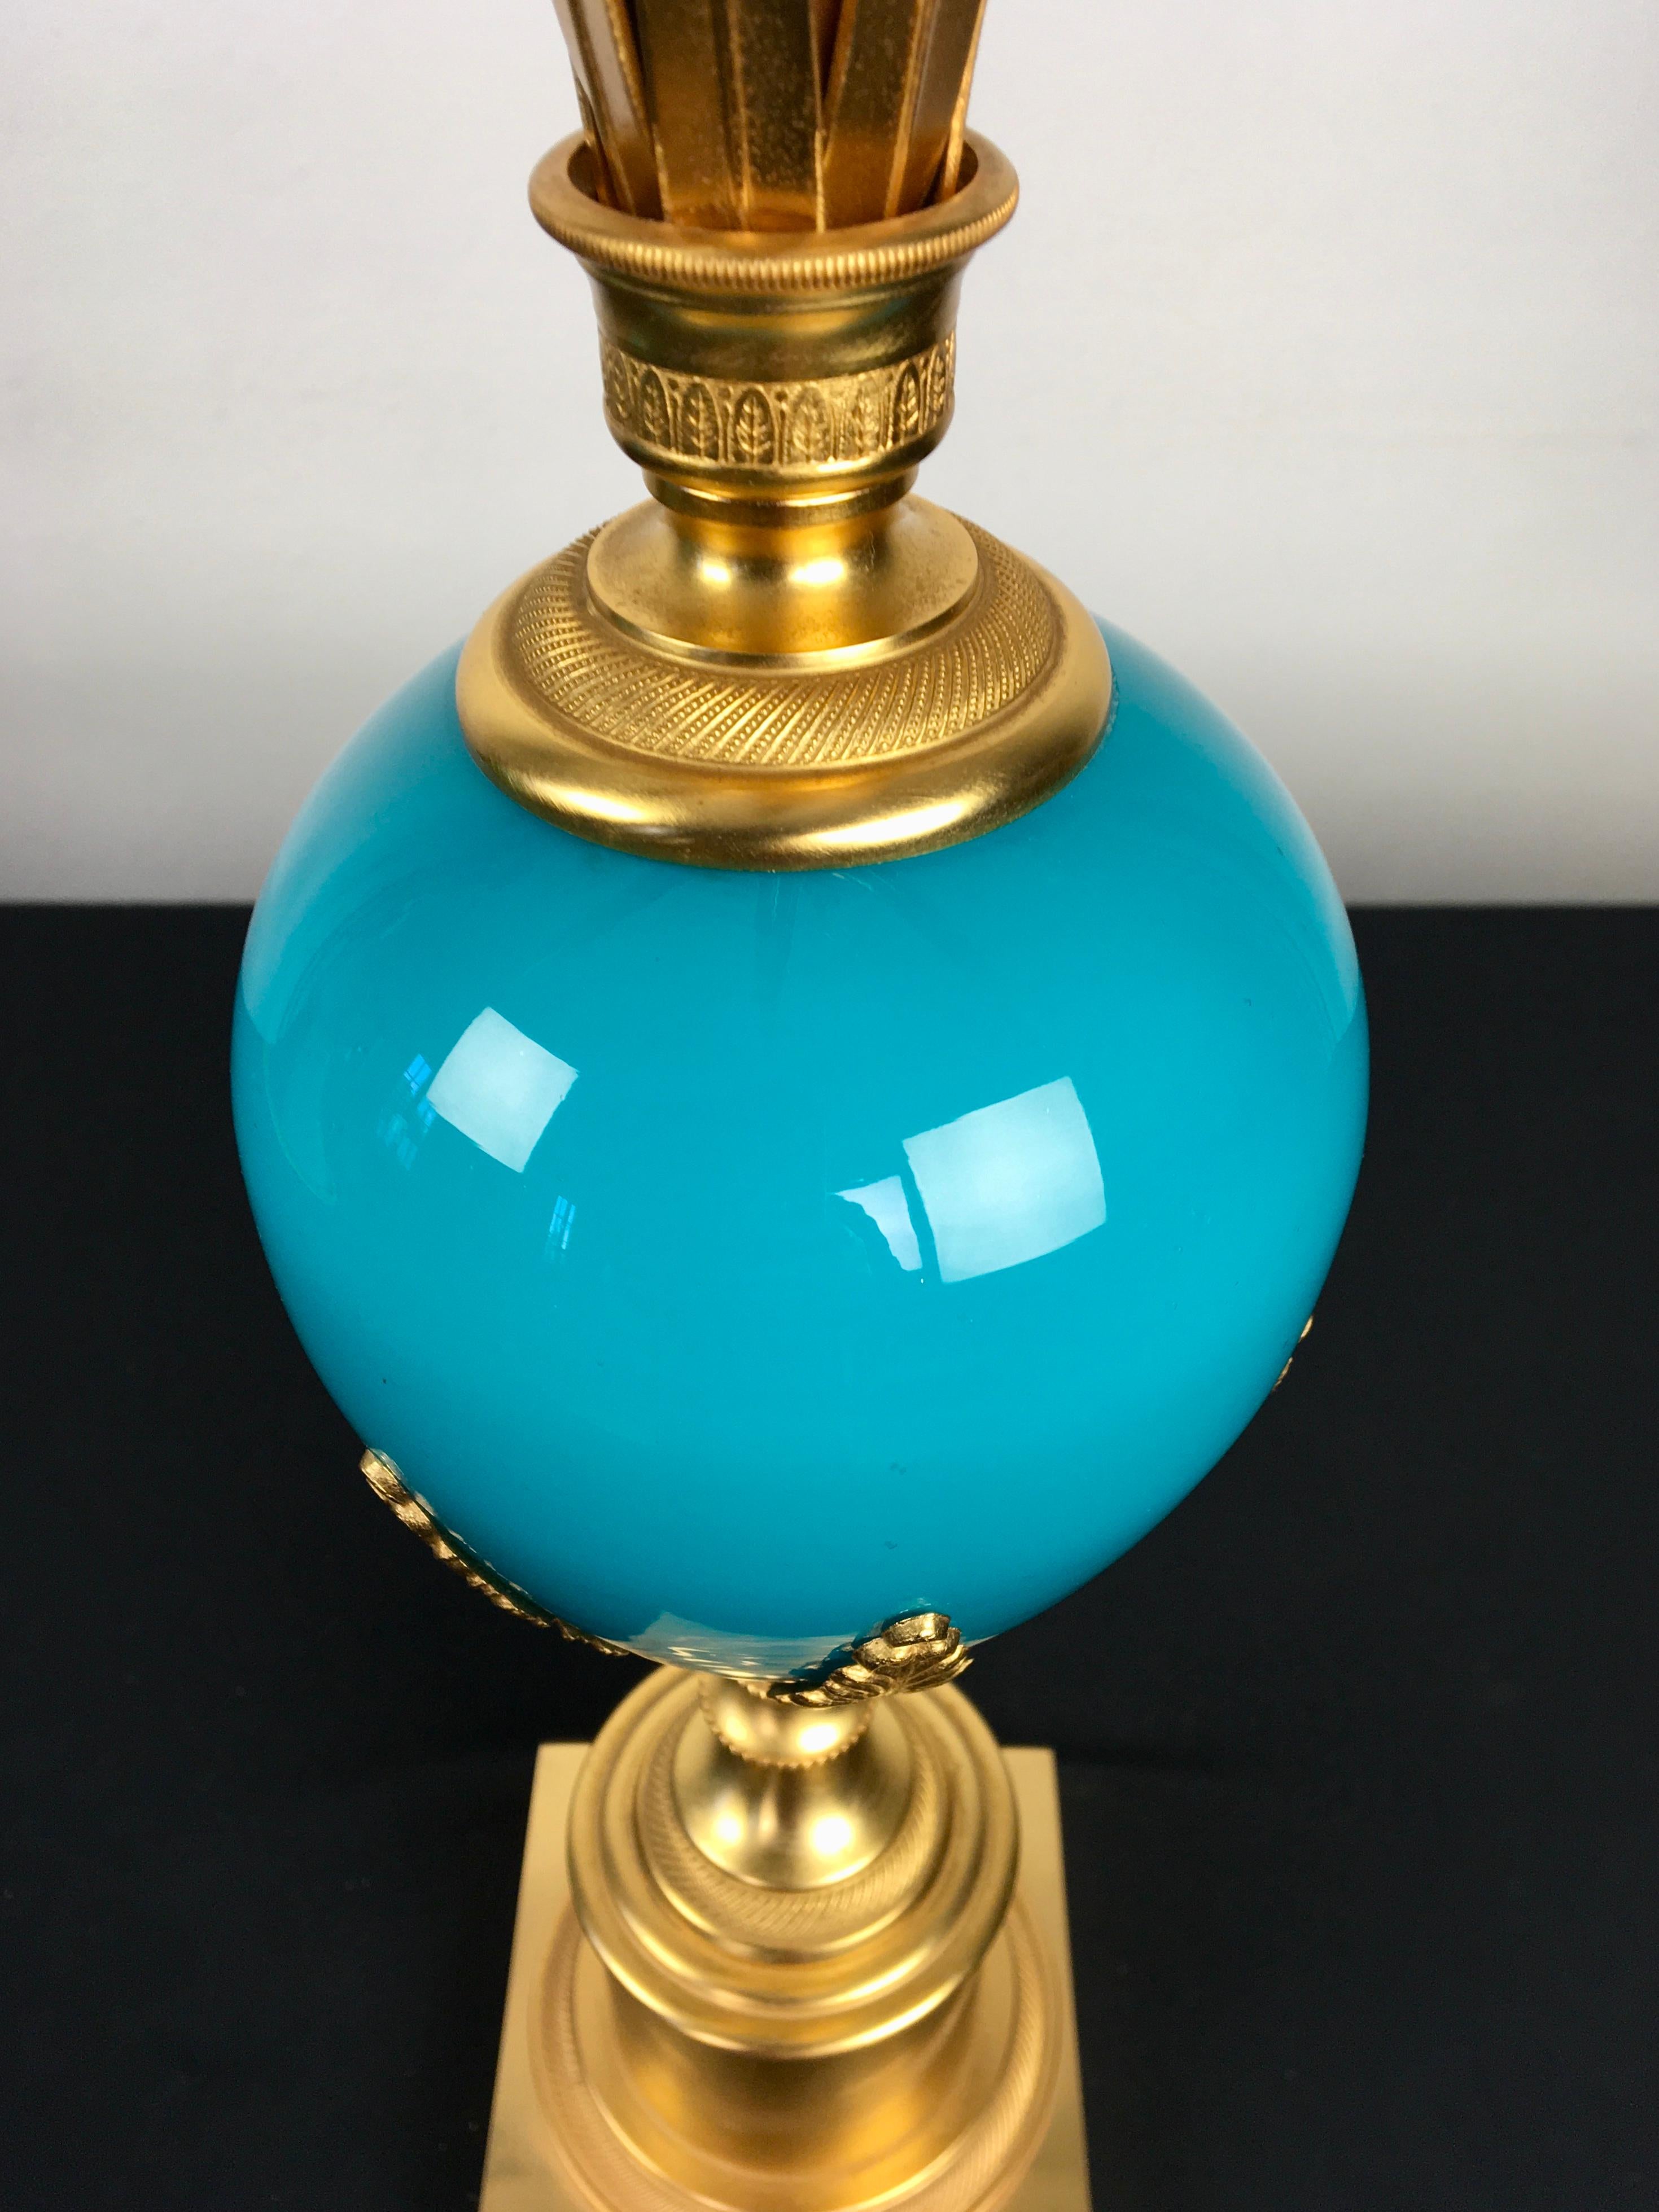 20th Century Blue Turquoise Opaline Ostrich Egg Table Lamp, S.A. Boulanger, Belgium